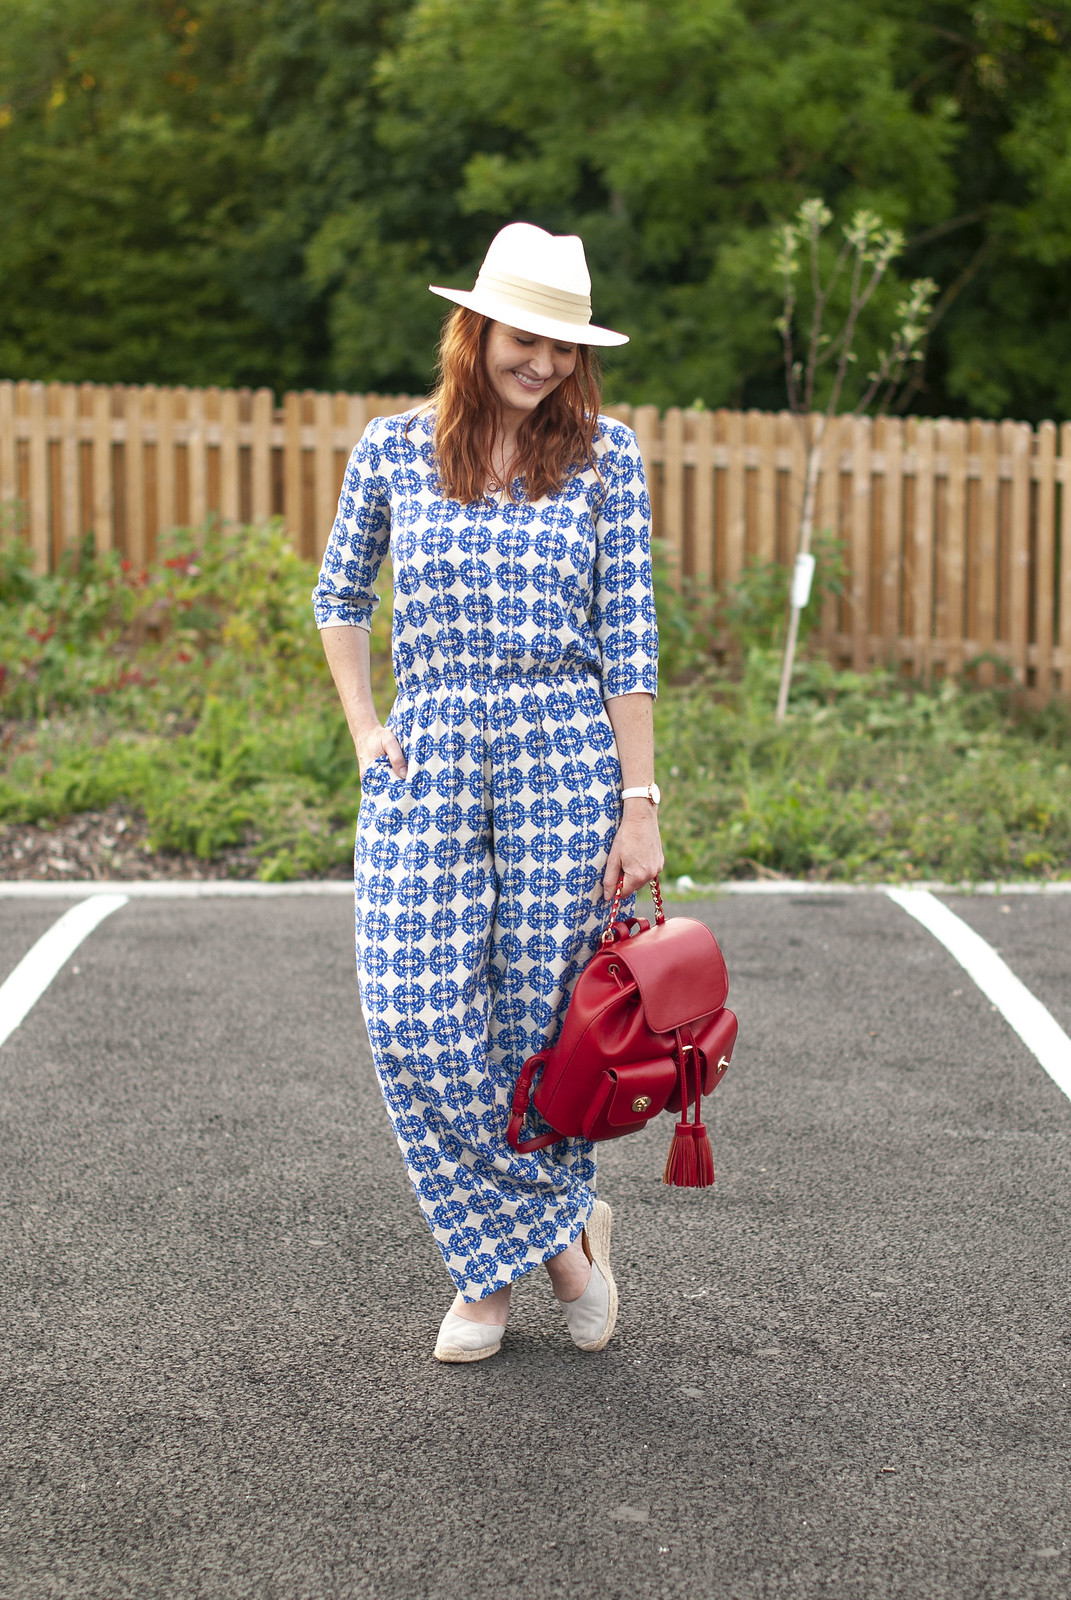 Like Nothing Else in the Shops: A Blue Patterned Jumpsuit \ grey wedge espadrilles \ cream Panama hat \ red backpack | Not Dressed As Lamb, over 40 style